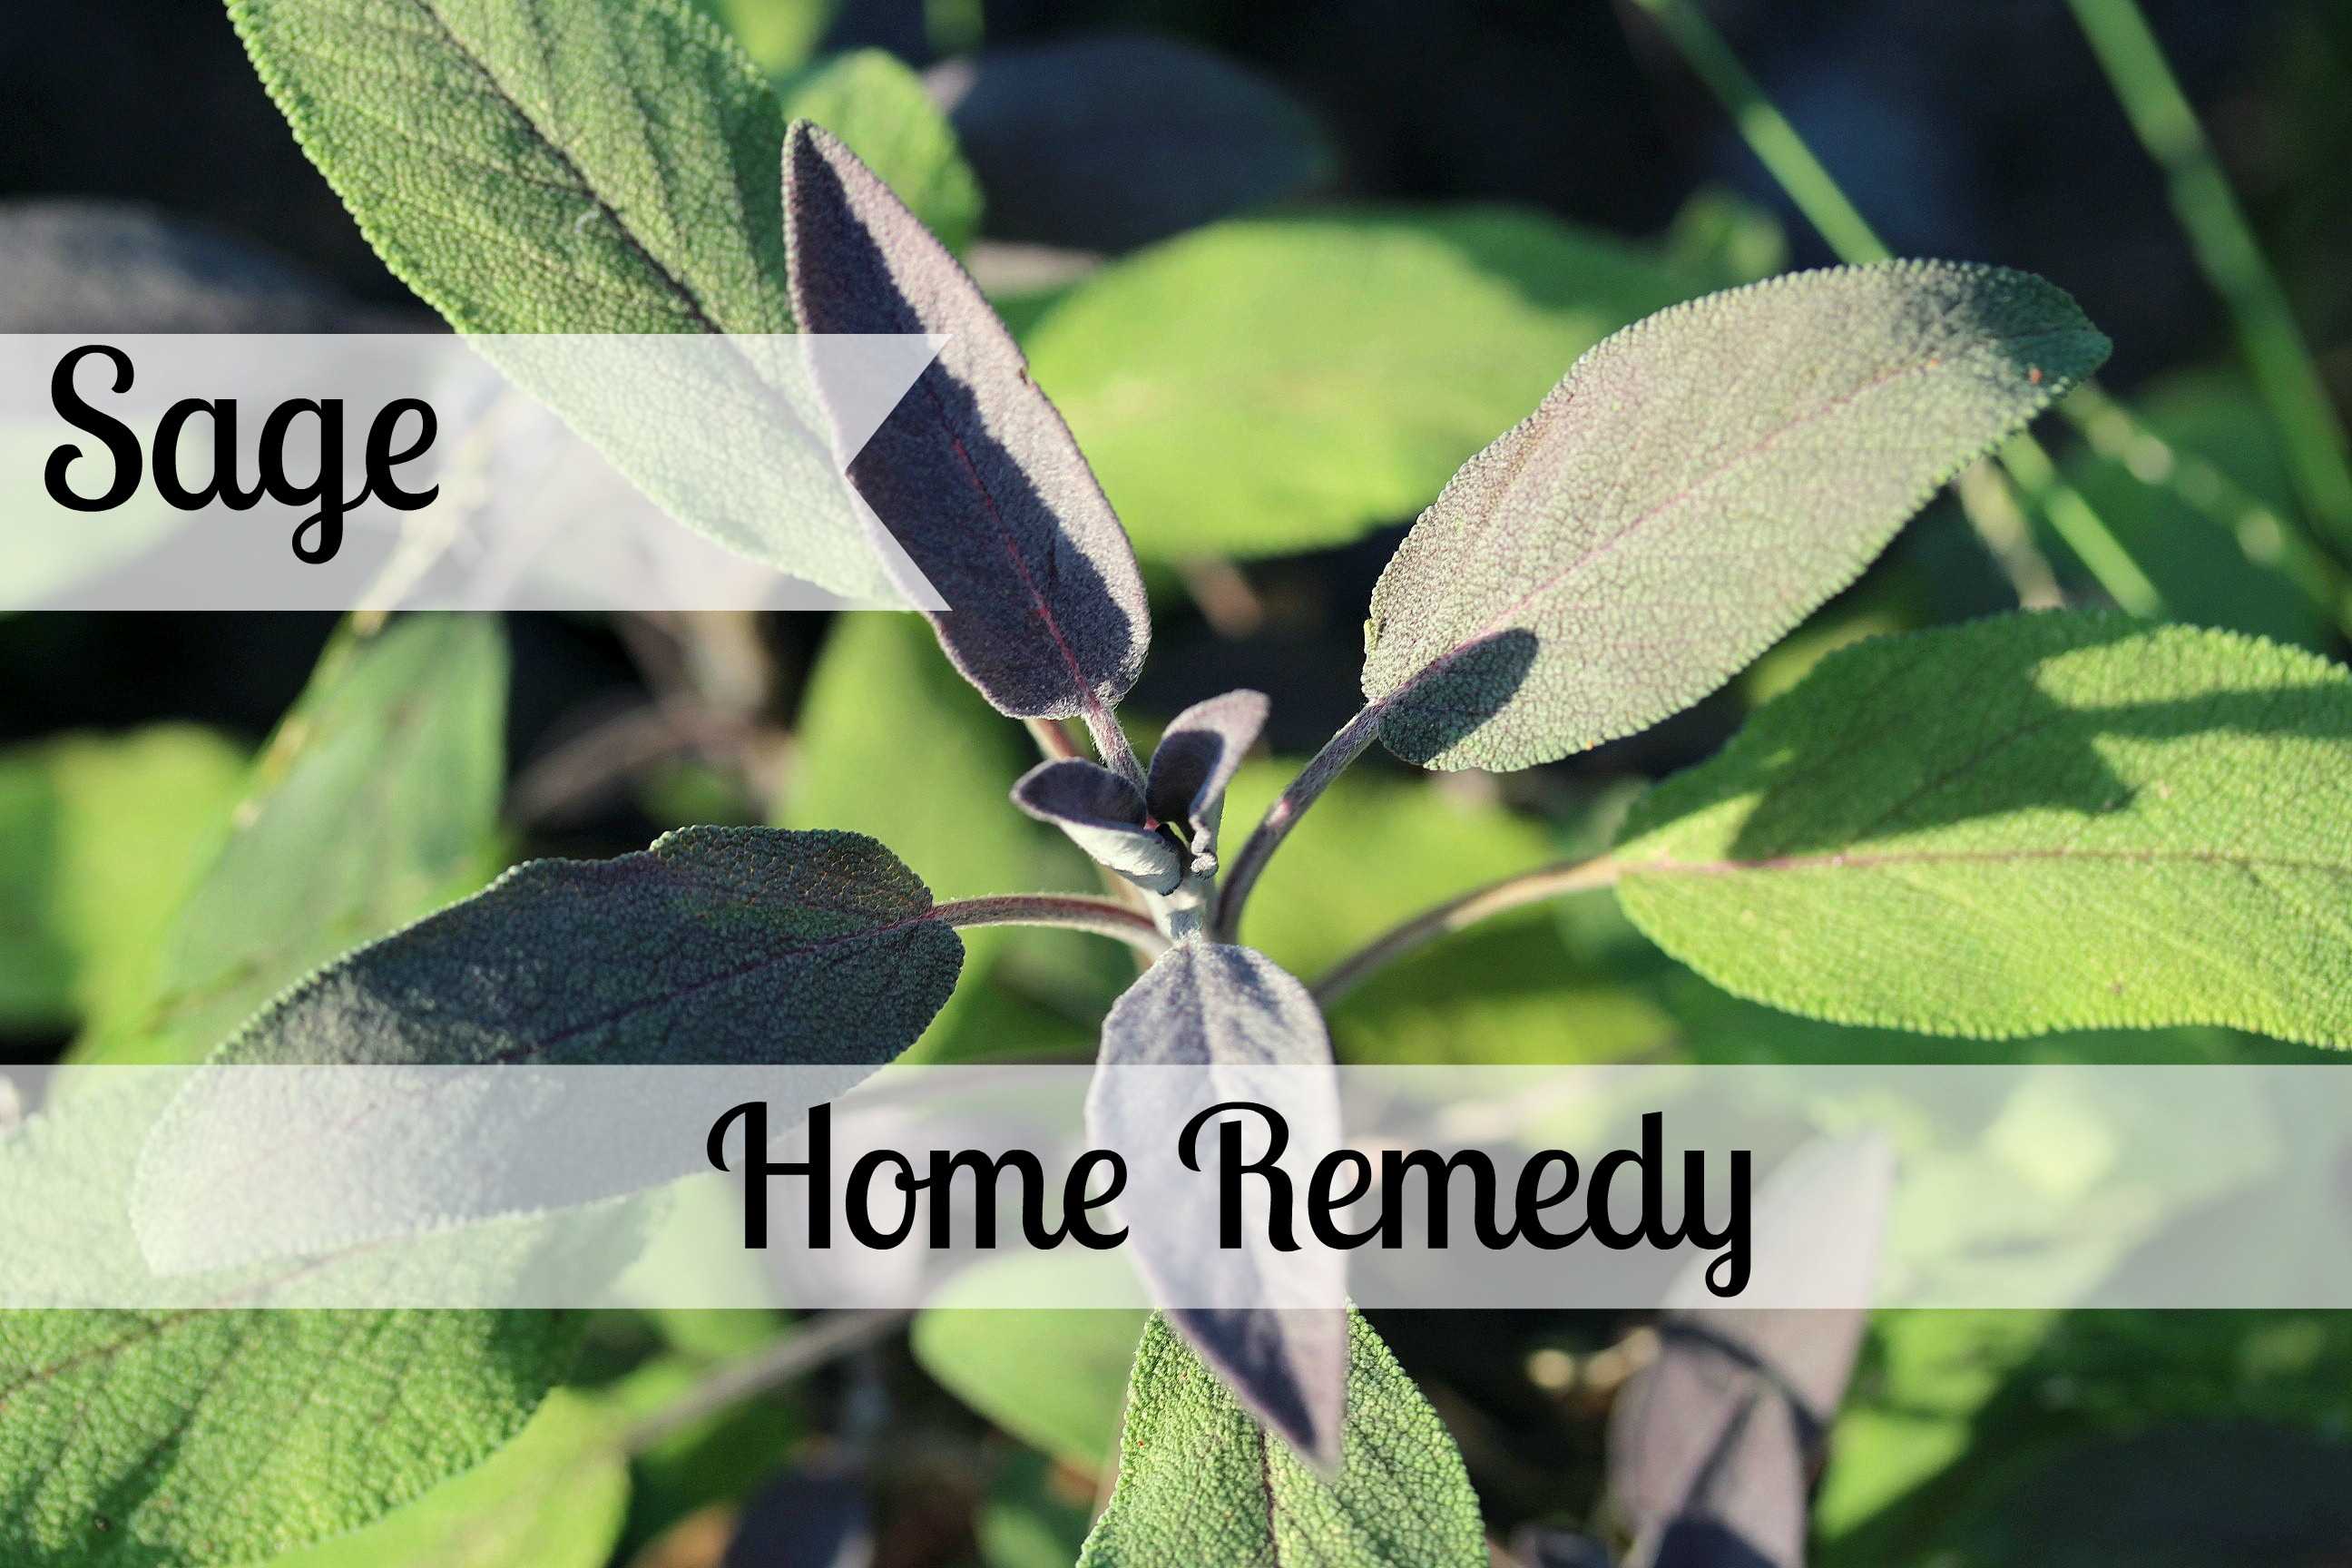 Sage: Home Remedy for Your Winter Wellness